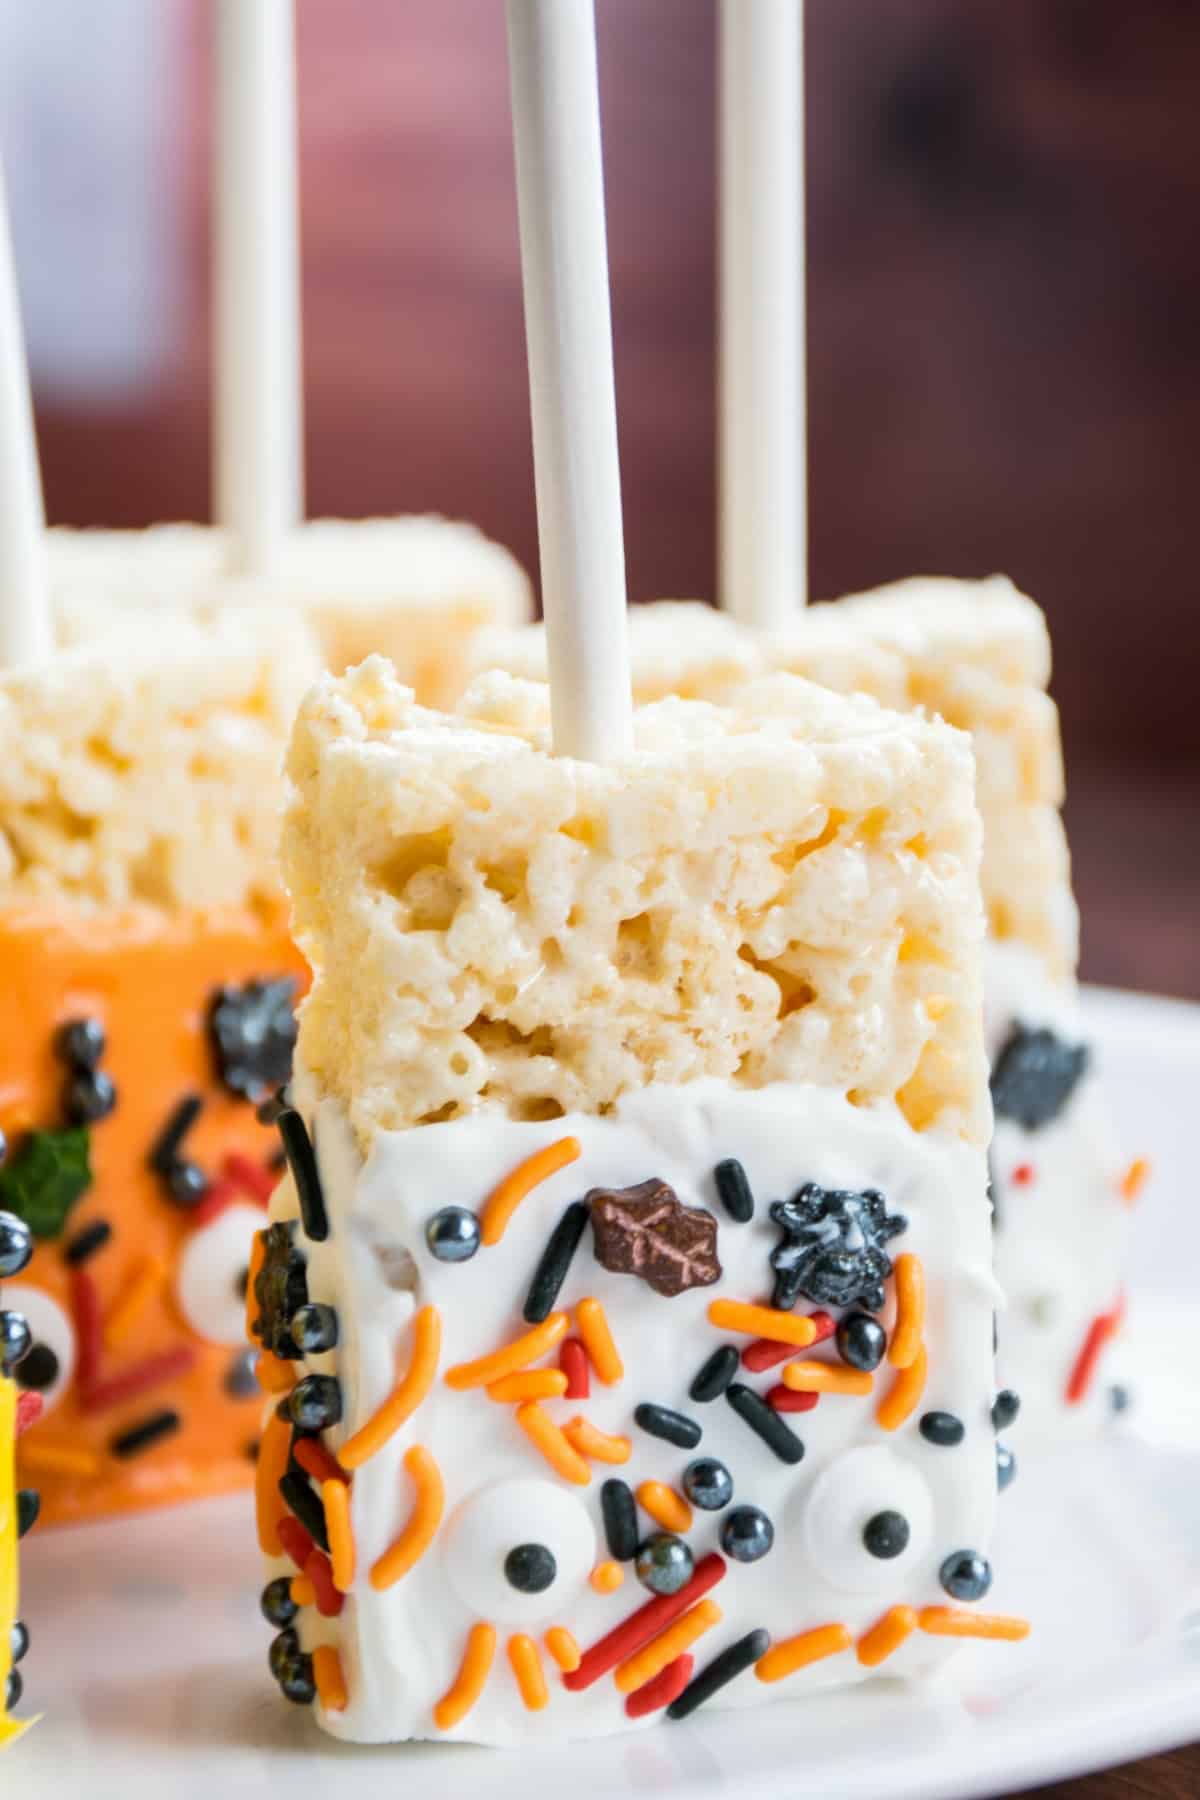 A fantastic Fall recipe to make with your children. Rice Krispie treats dipped in candy melts and topped with your favorite holiday sprinkles. A fun, quick, and easy holiday treat that anyone will enjoy making.